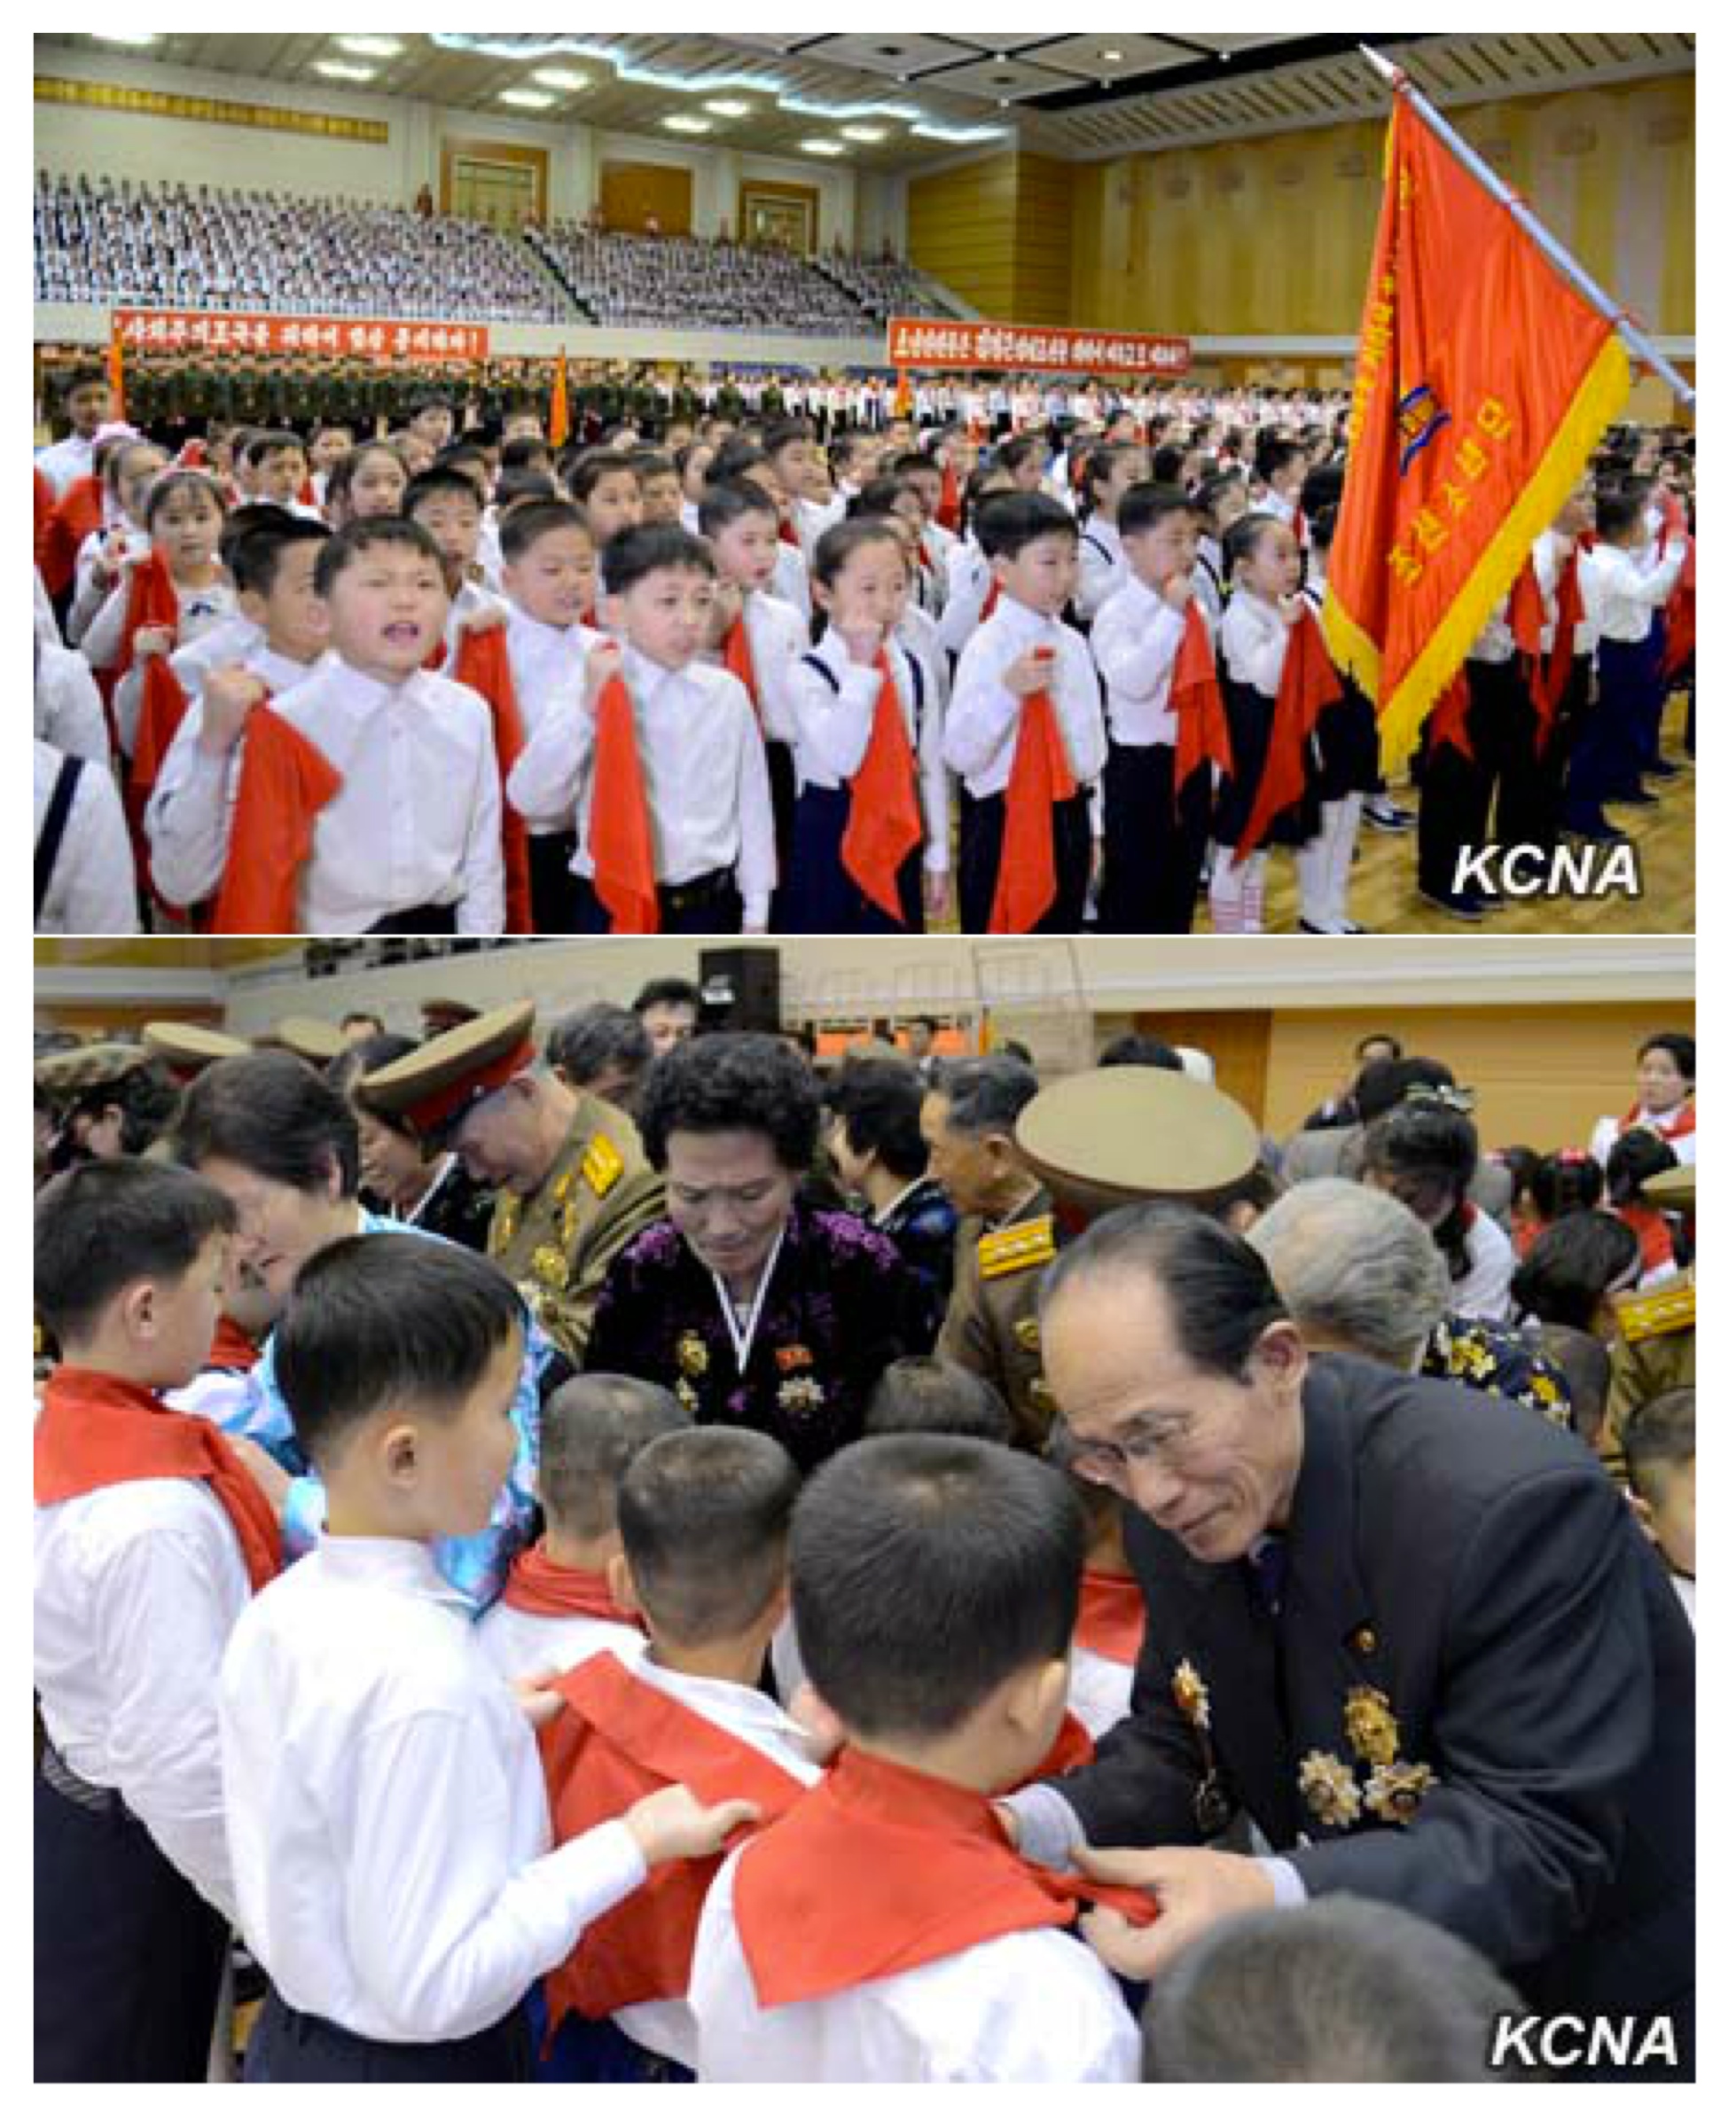 Inductees of the Korean Children's Union at a February 16, 2016 ceremony in Pyongyang (top) and the induction ceremony (bottom) (Photos: KCNA).